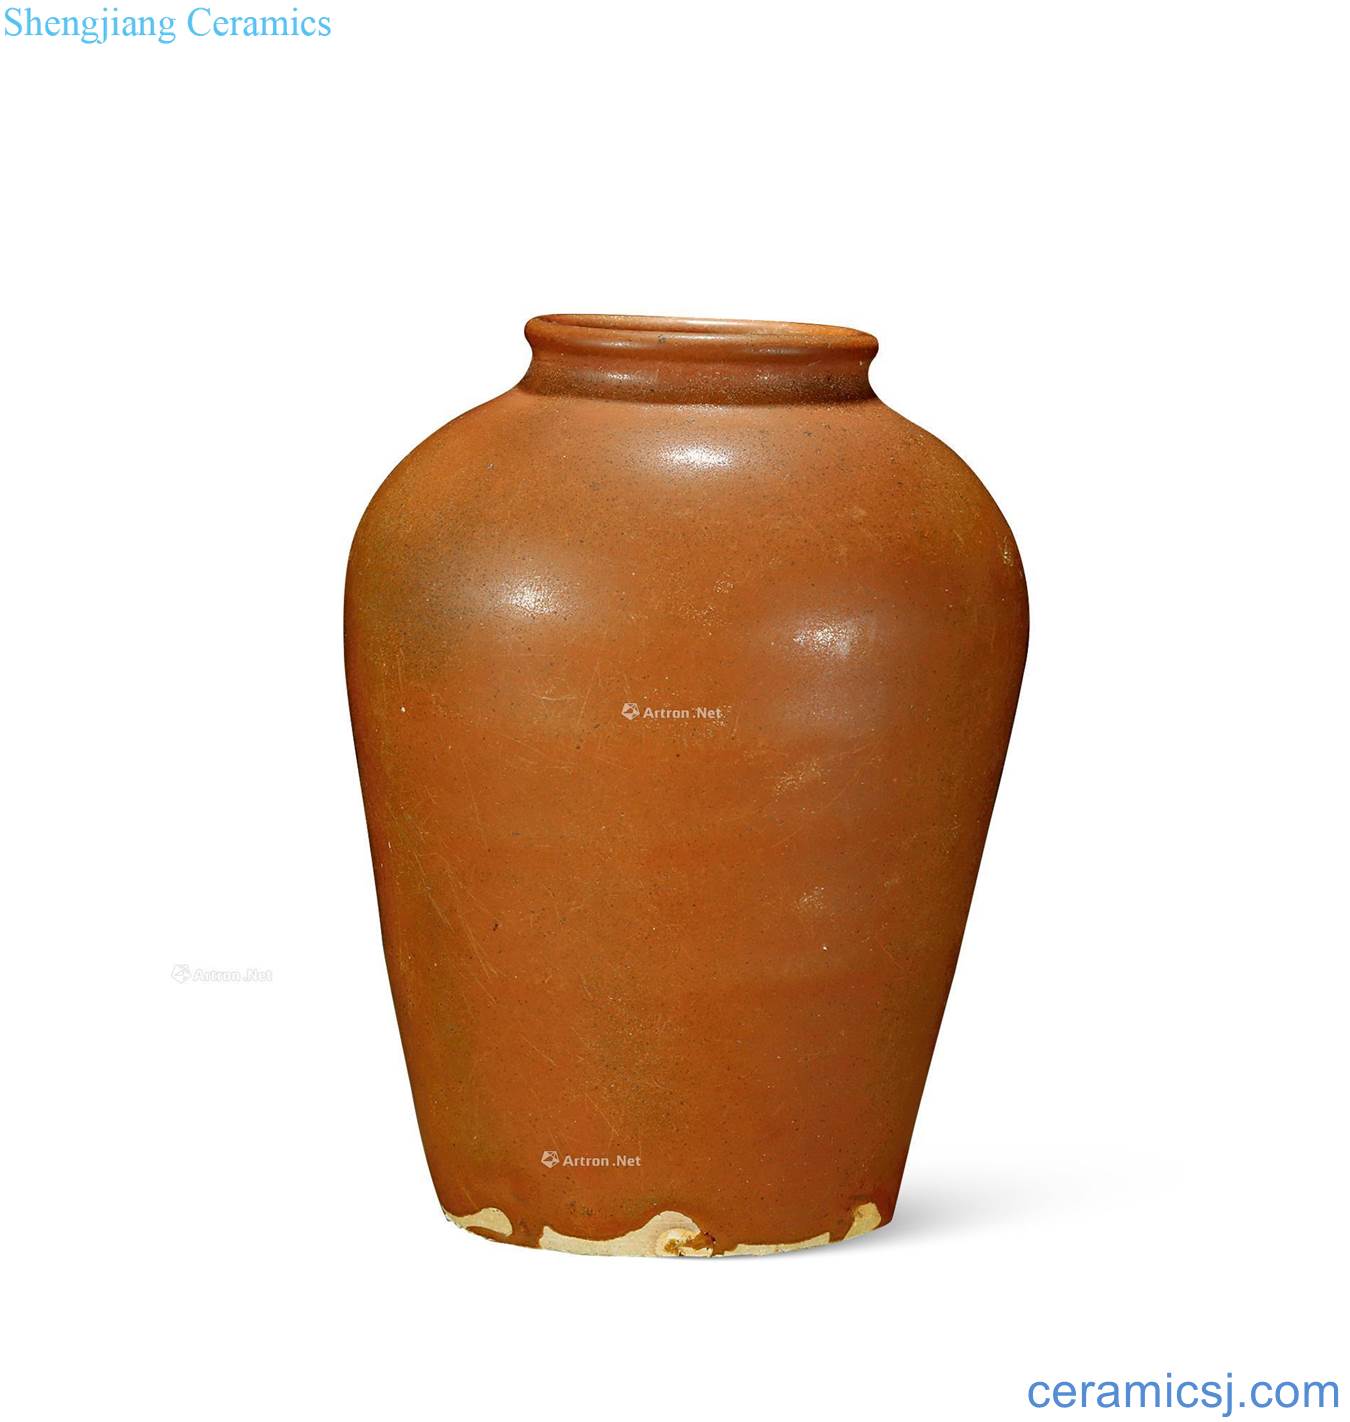 The song dynasty Yao state zijin glazed pot